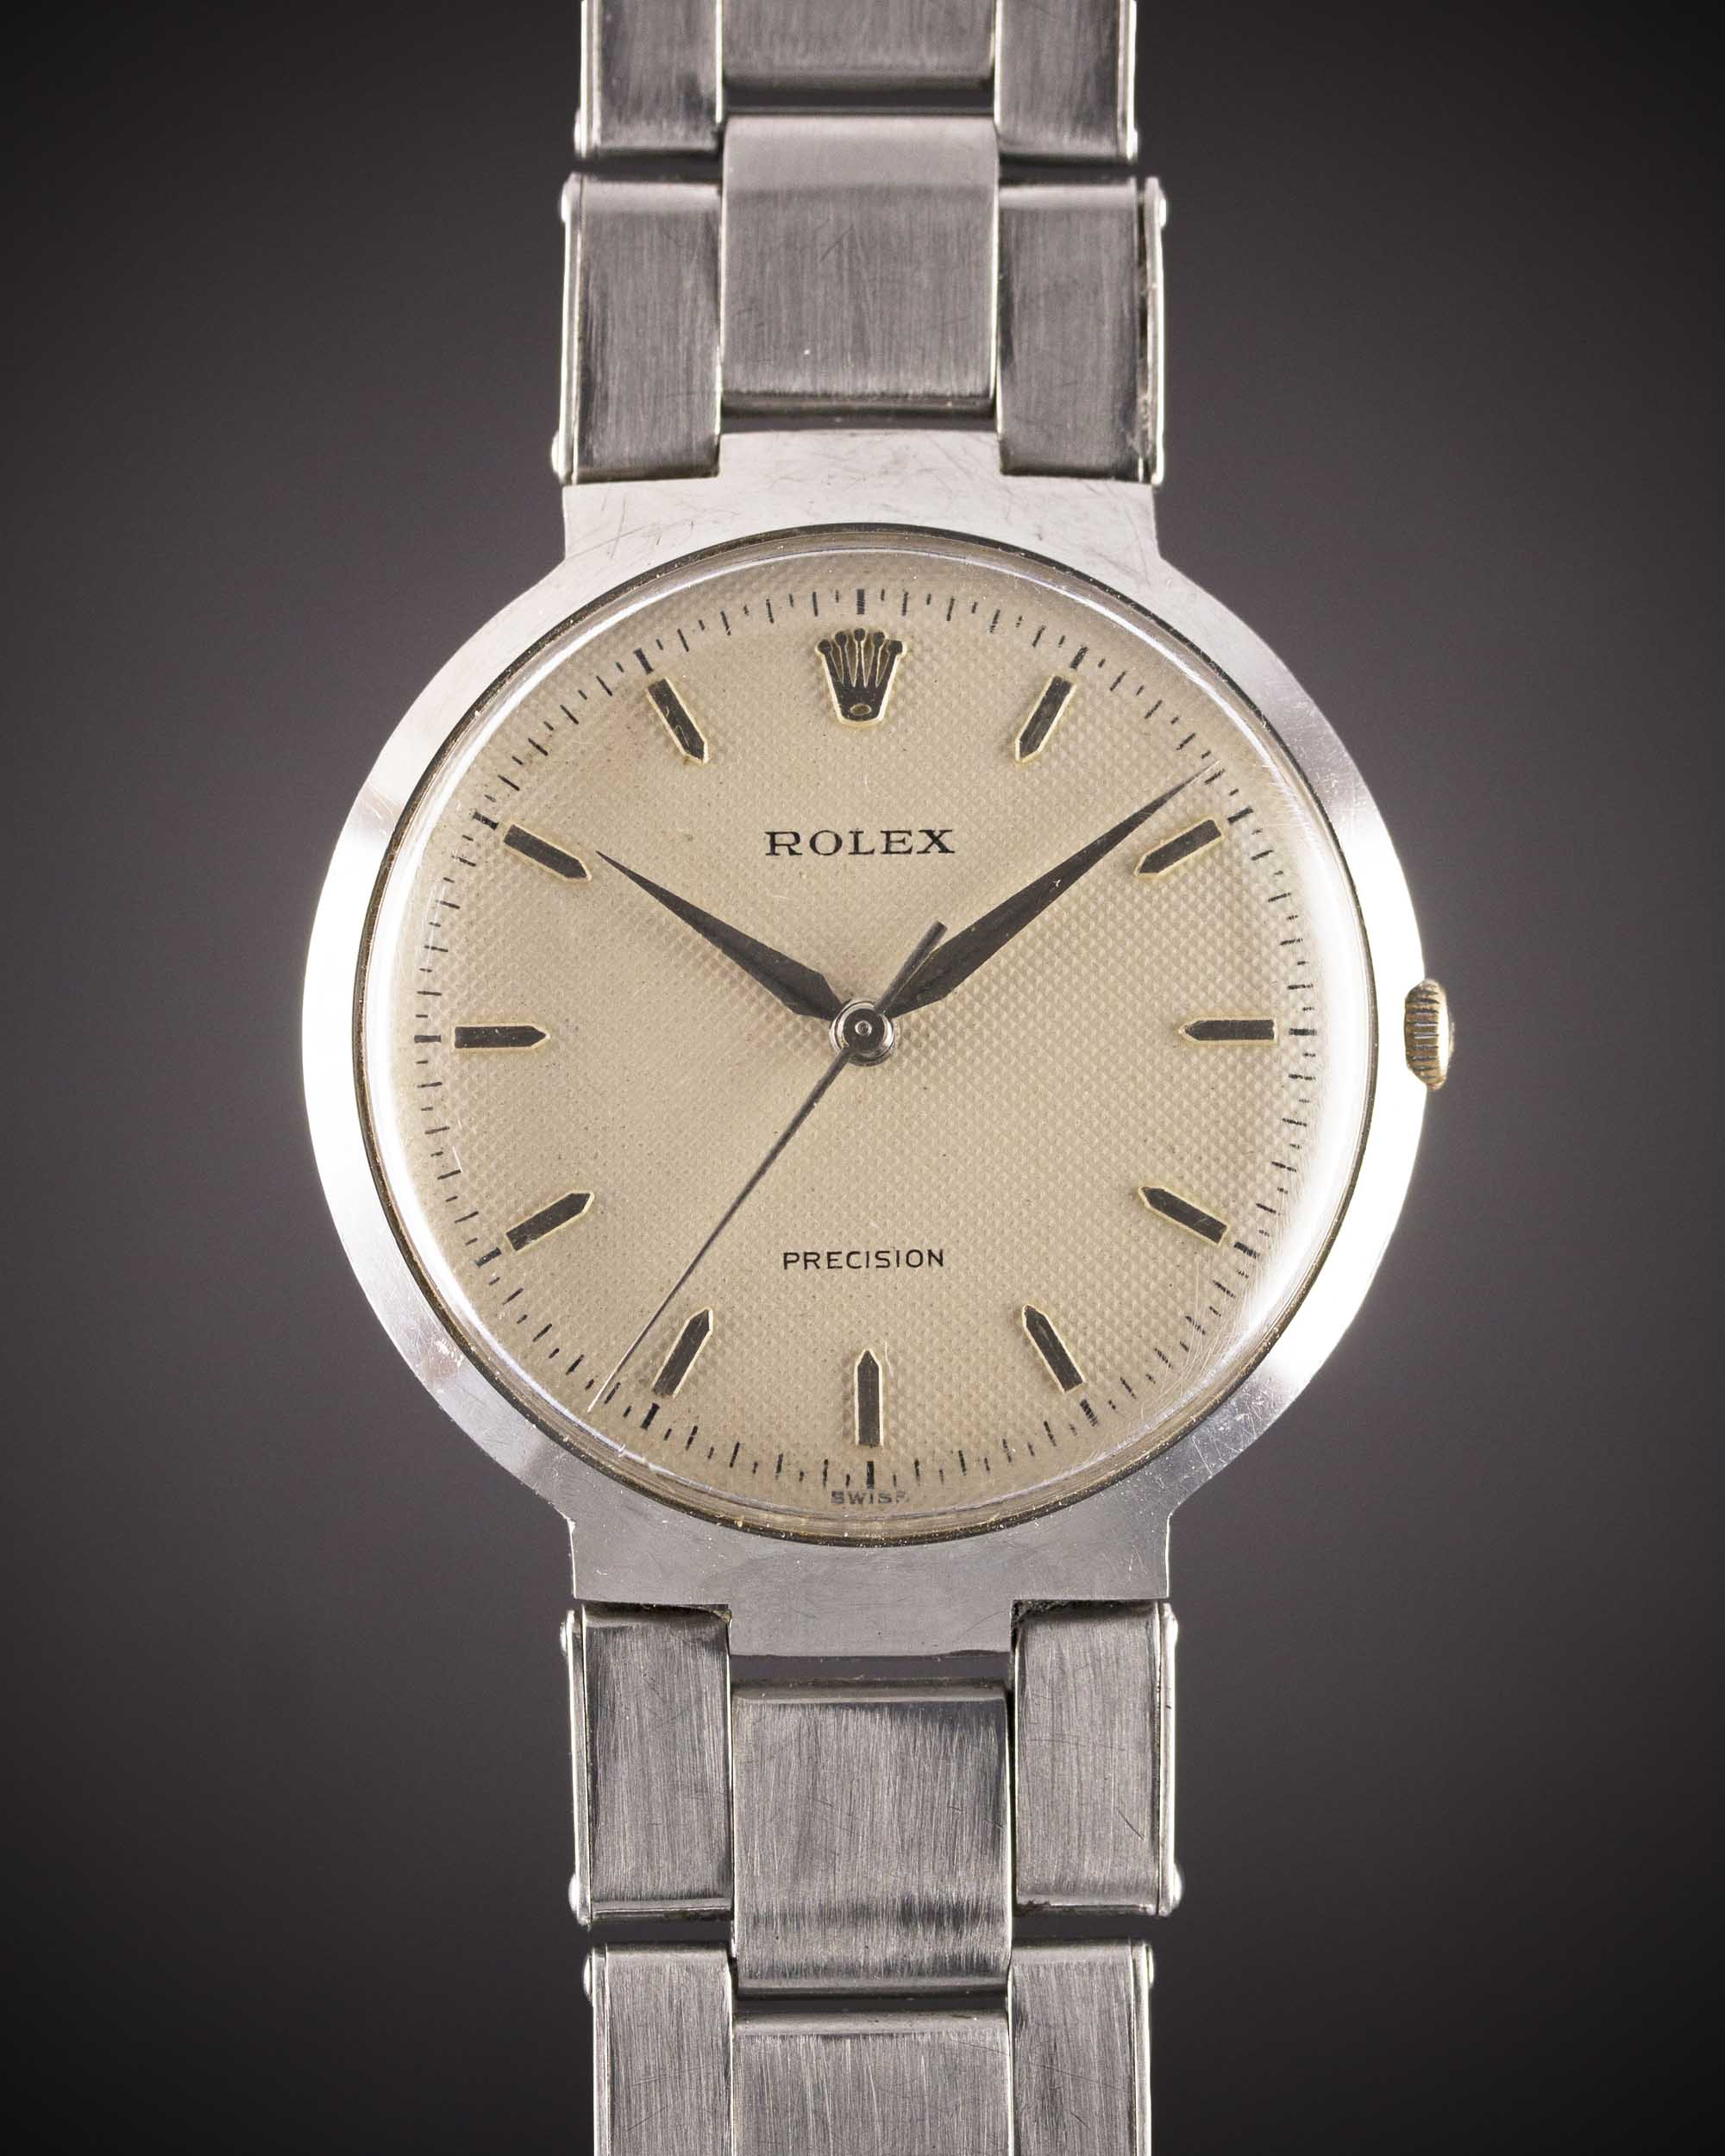 A RARE GENTLEMAN'S STAINLESS STEEL ROLEX "UFO" PRECISION BRACELET WATCH CIRCA 1958, REF. 9083 WITH - Image 2 of 12